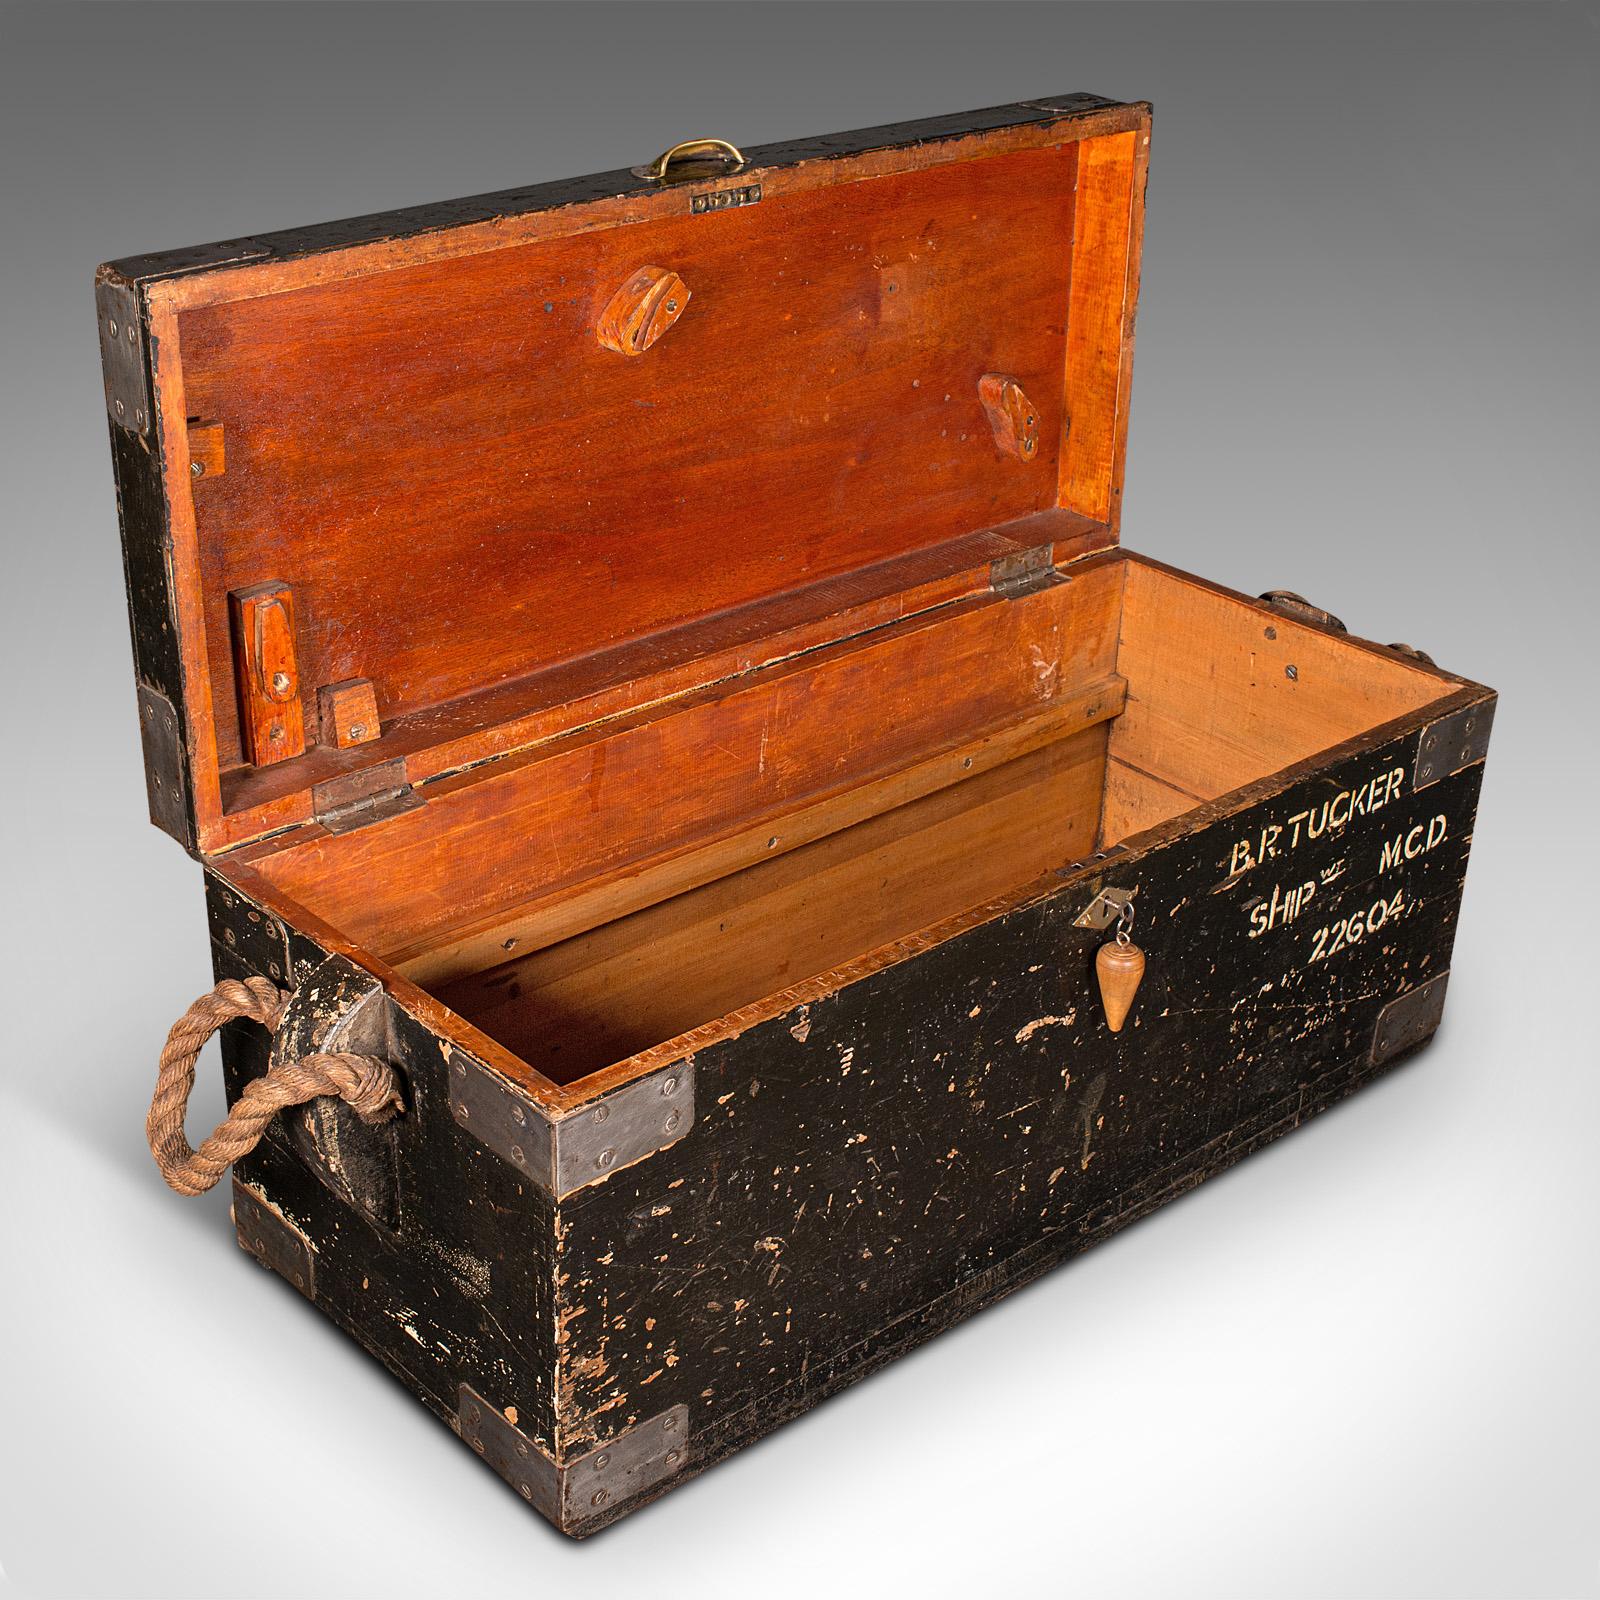 Vintage Shipwright's Tool Chest, English, Cedar, Pine, Craftsman's Trunk, C.1940 For Sale 2